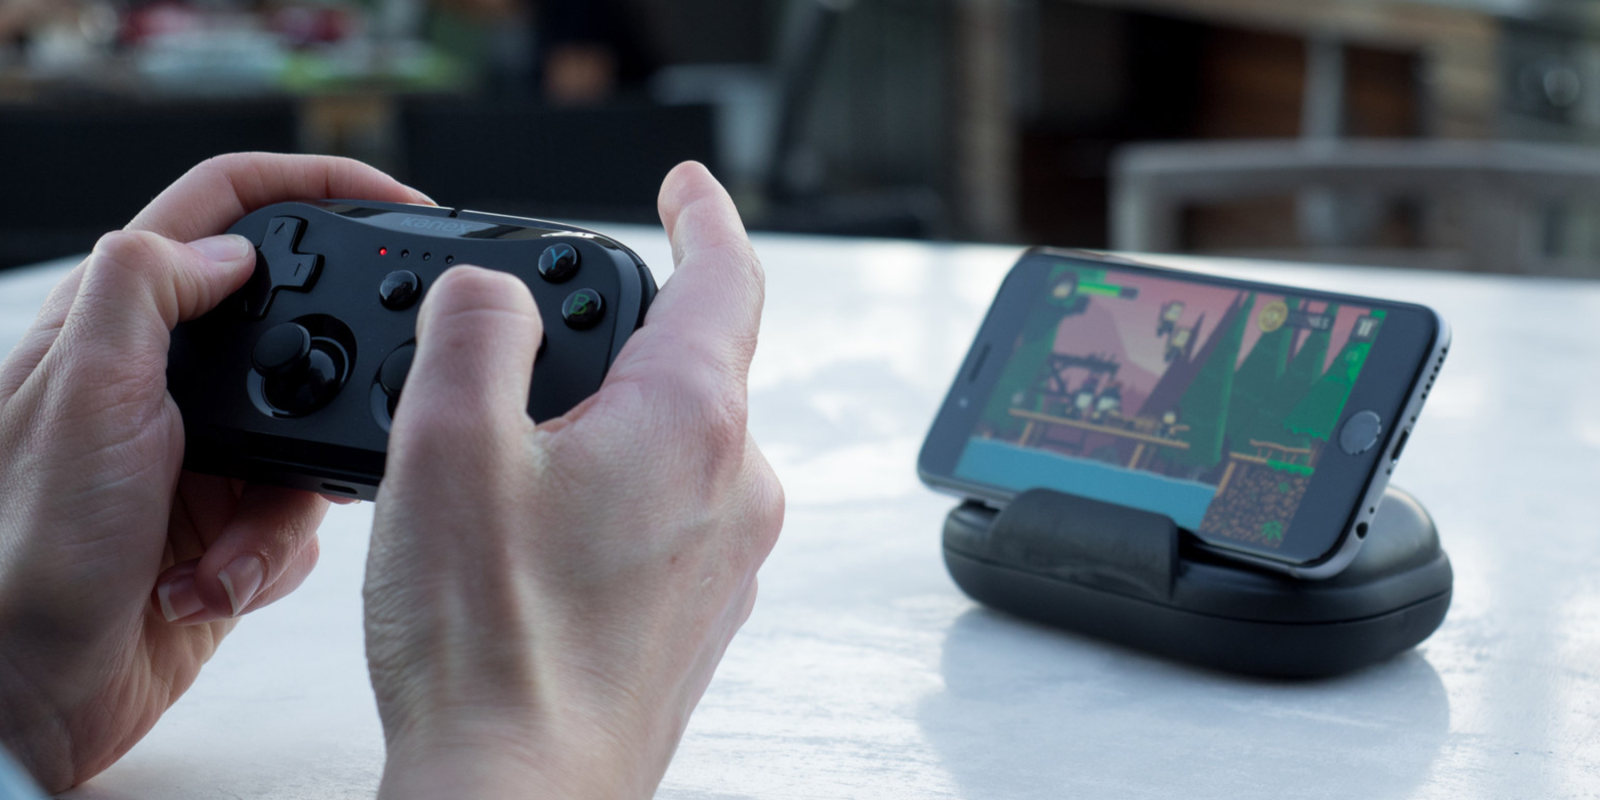 The New Kanex GoPlay Sidekick MFi Controller Has a Neat Portable Case That Doubles as a Stand